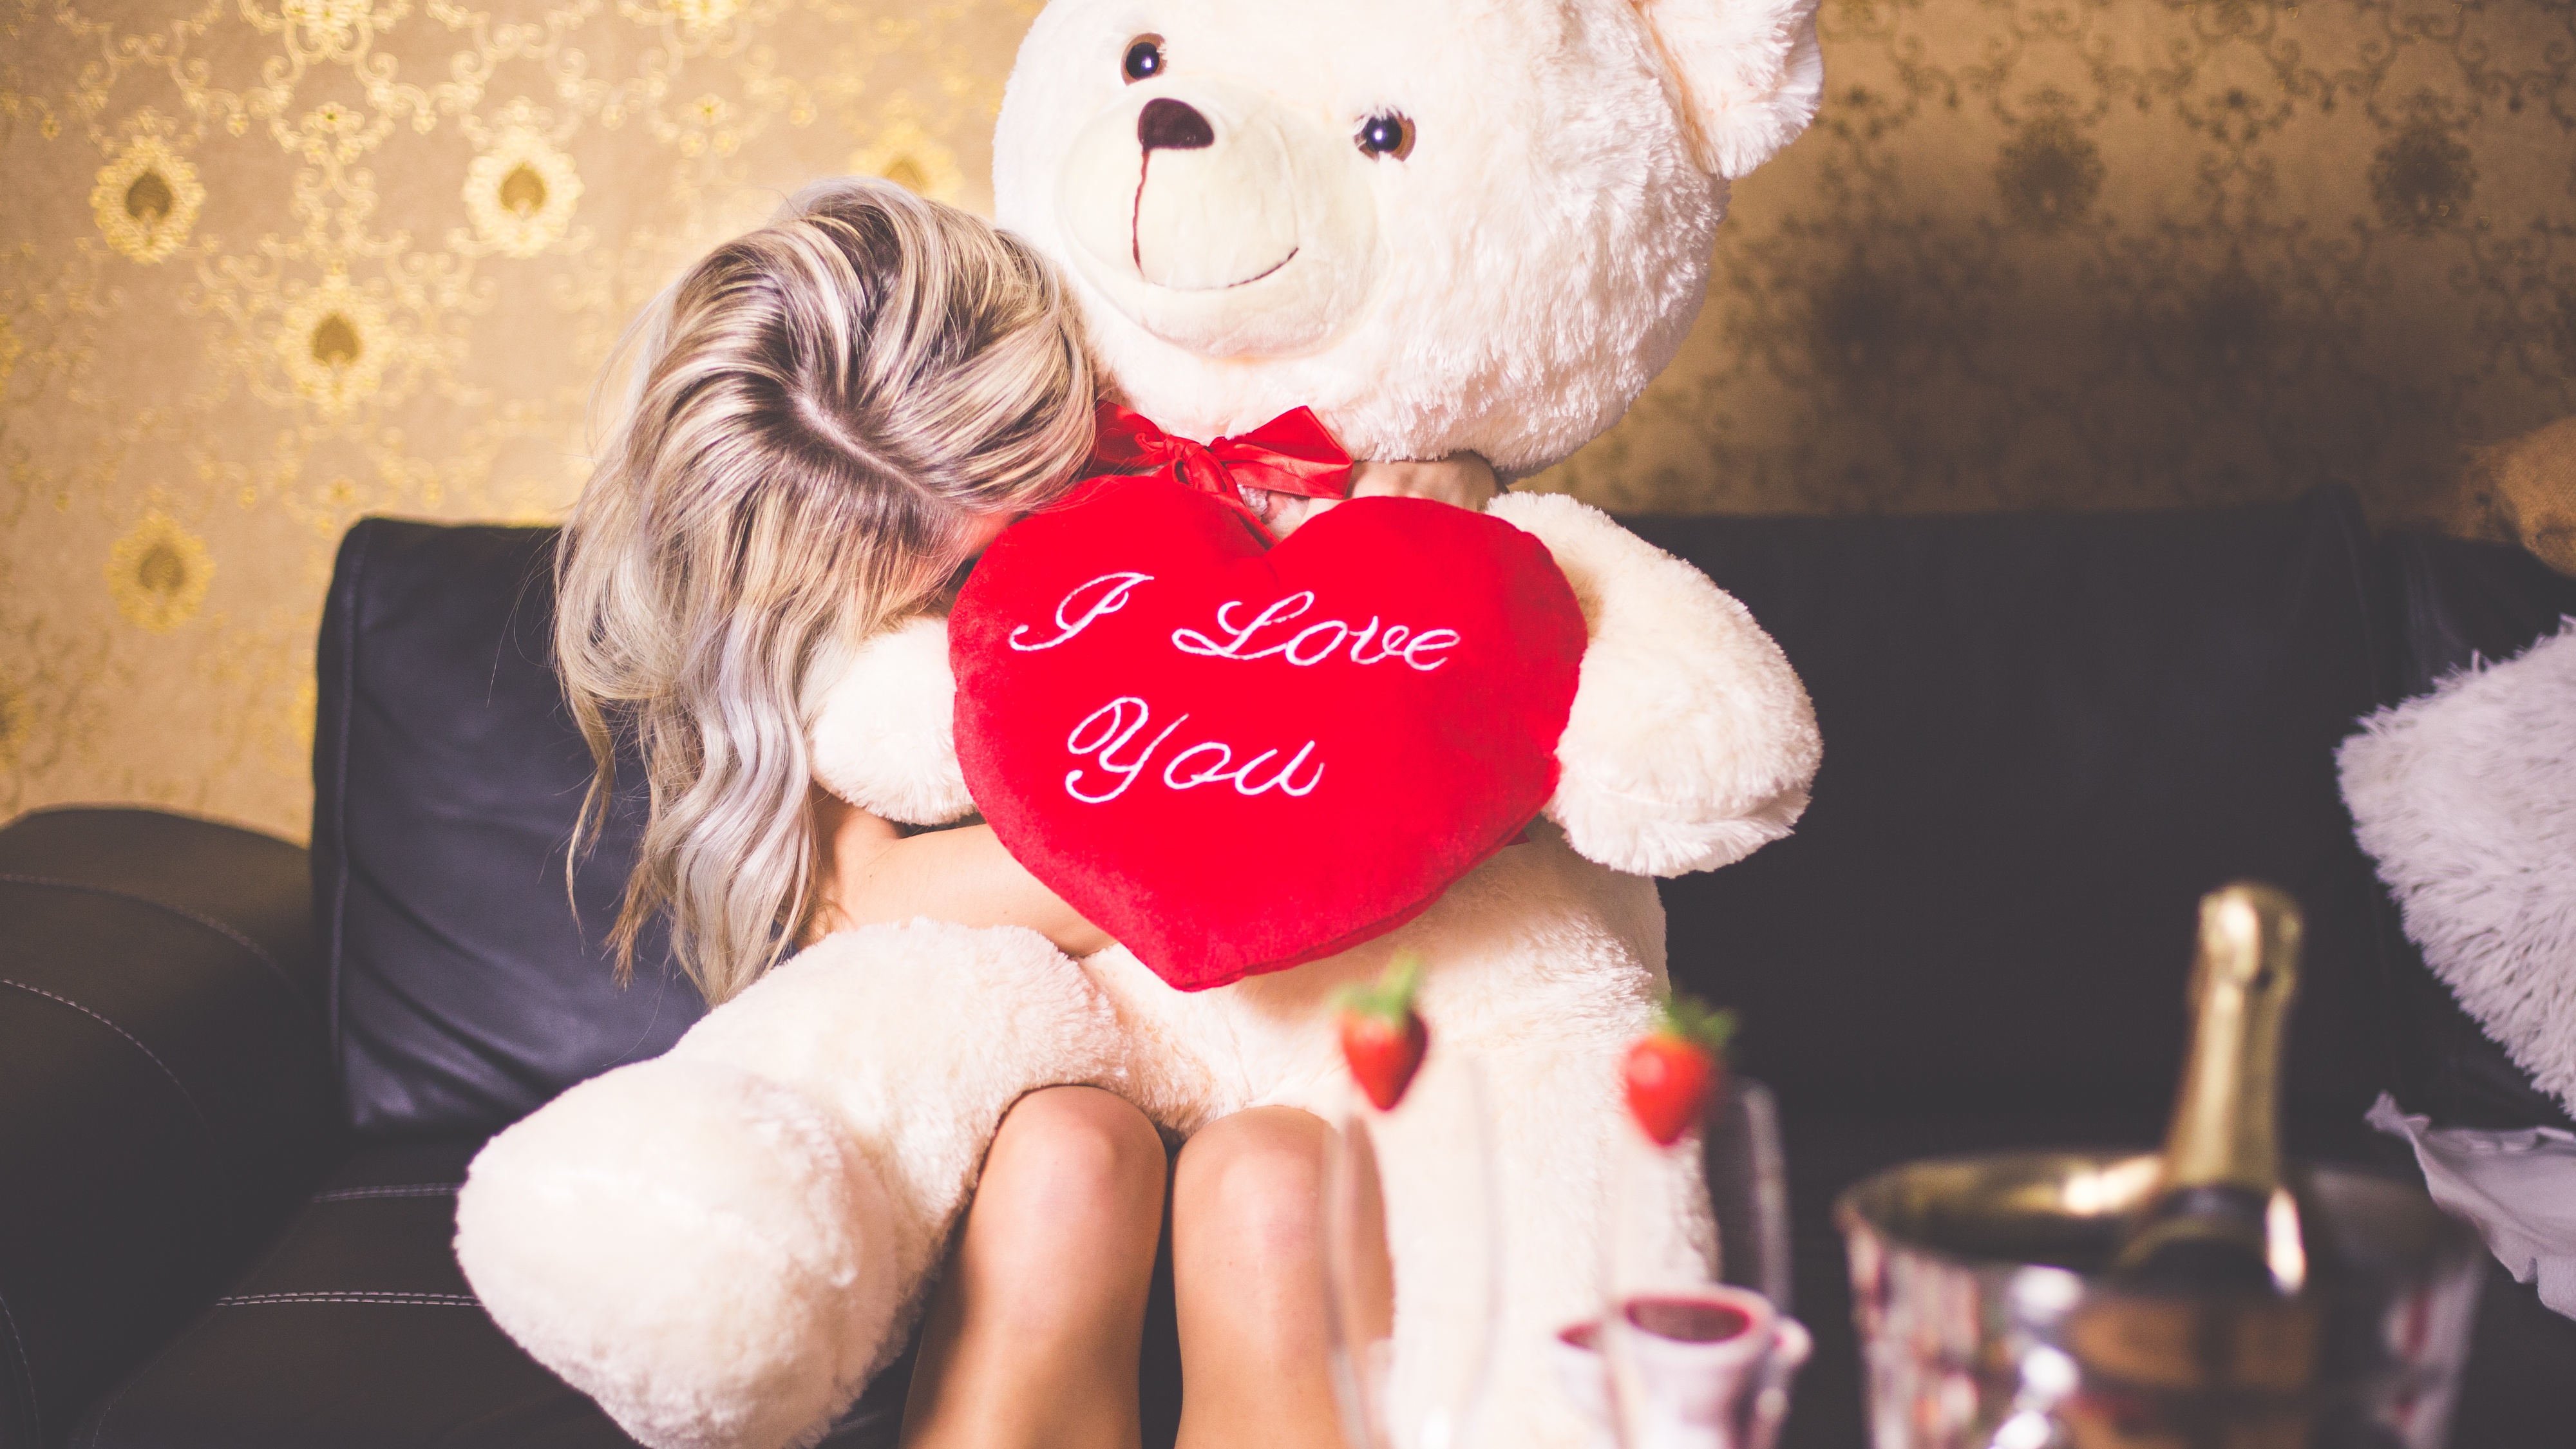 Women Blonde Dyed Hair Teddy Bears Heart Pillow Couch Strawberries Champagne Love Red Bow Stuffed An 4000x2250